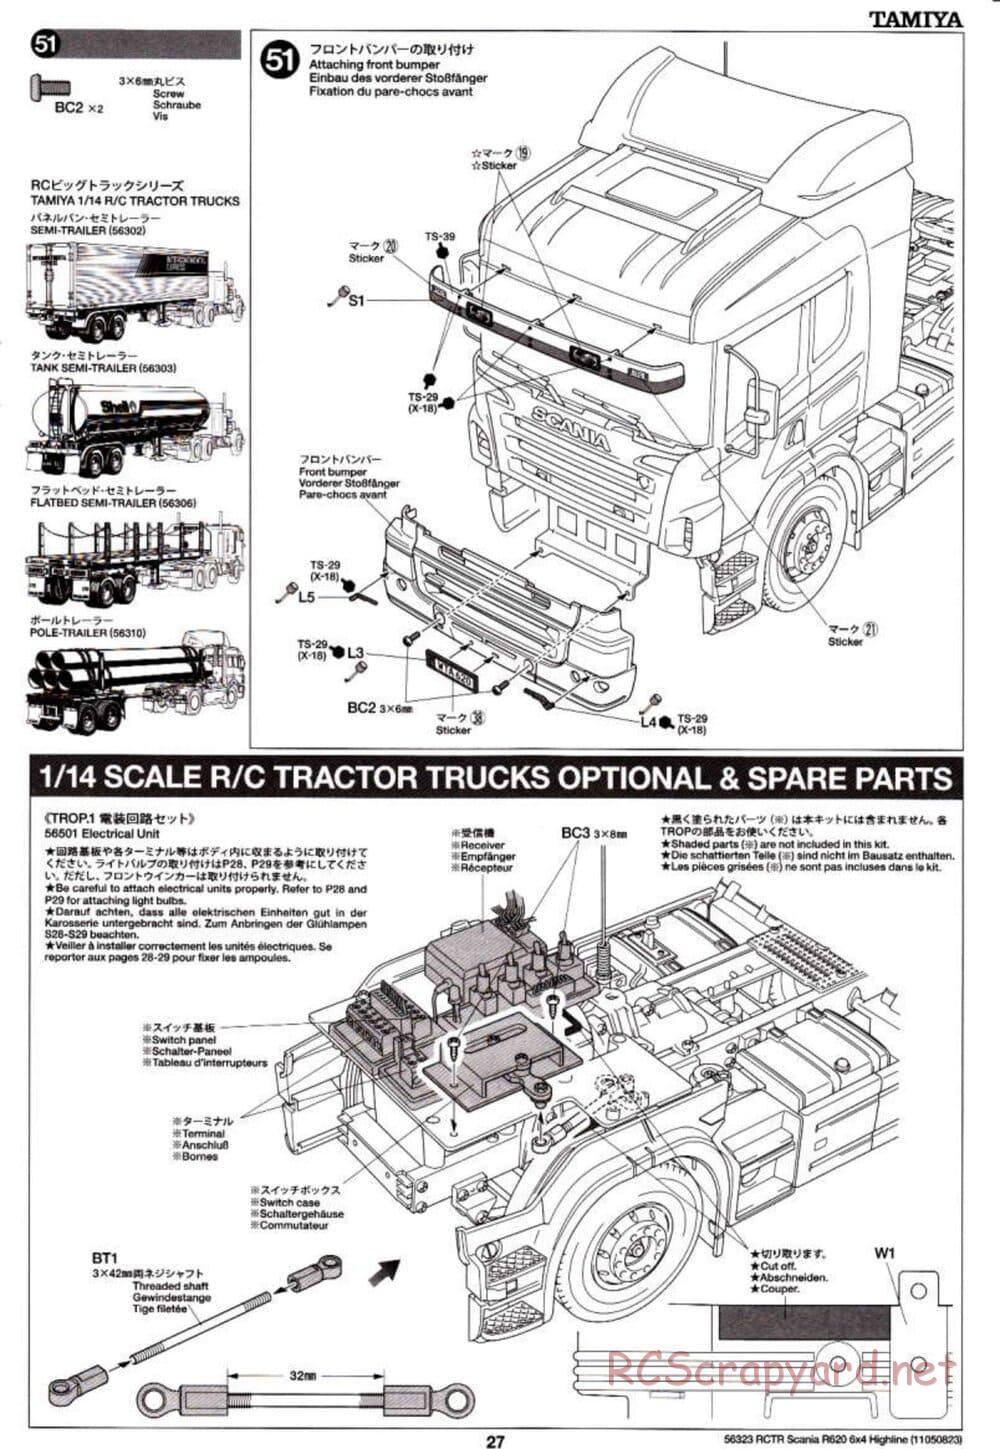 Tamiya - Scania R620 6x4 Highline Tractor Truck Chassis - Manual - Page 27